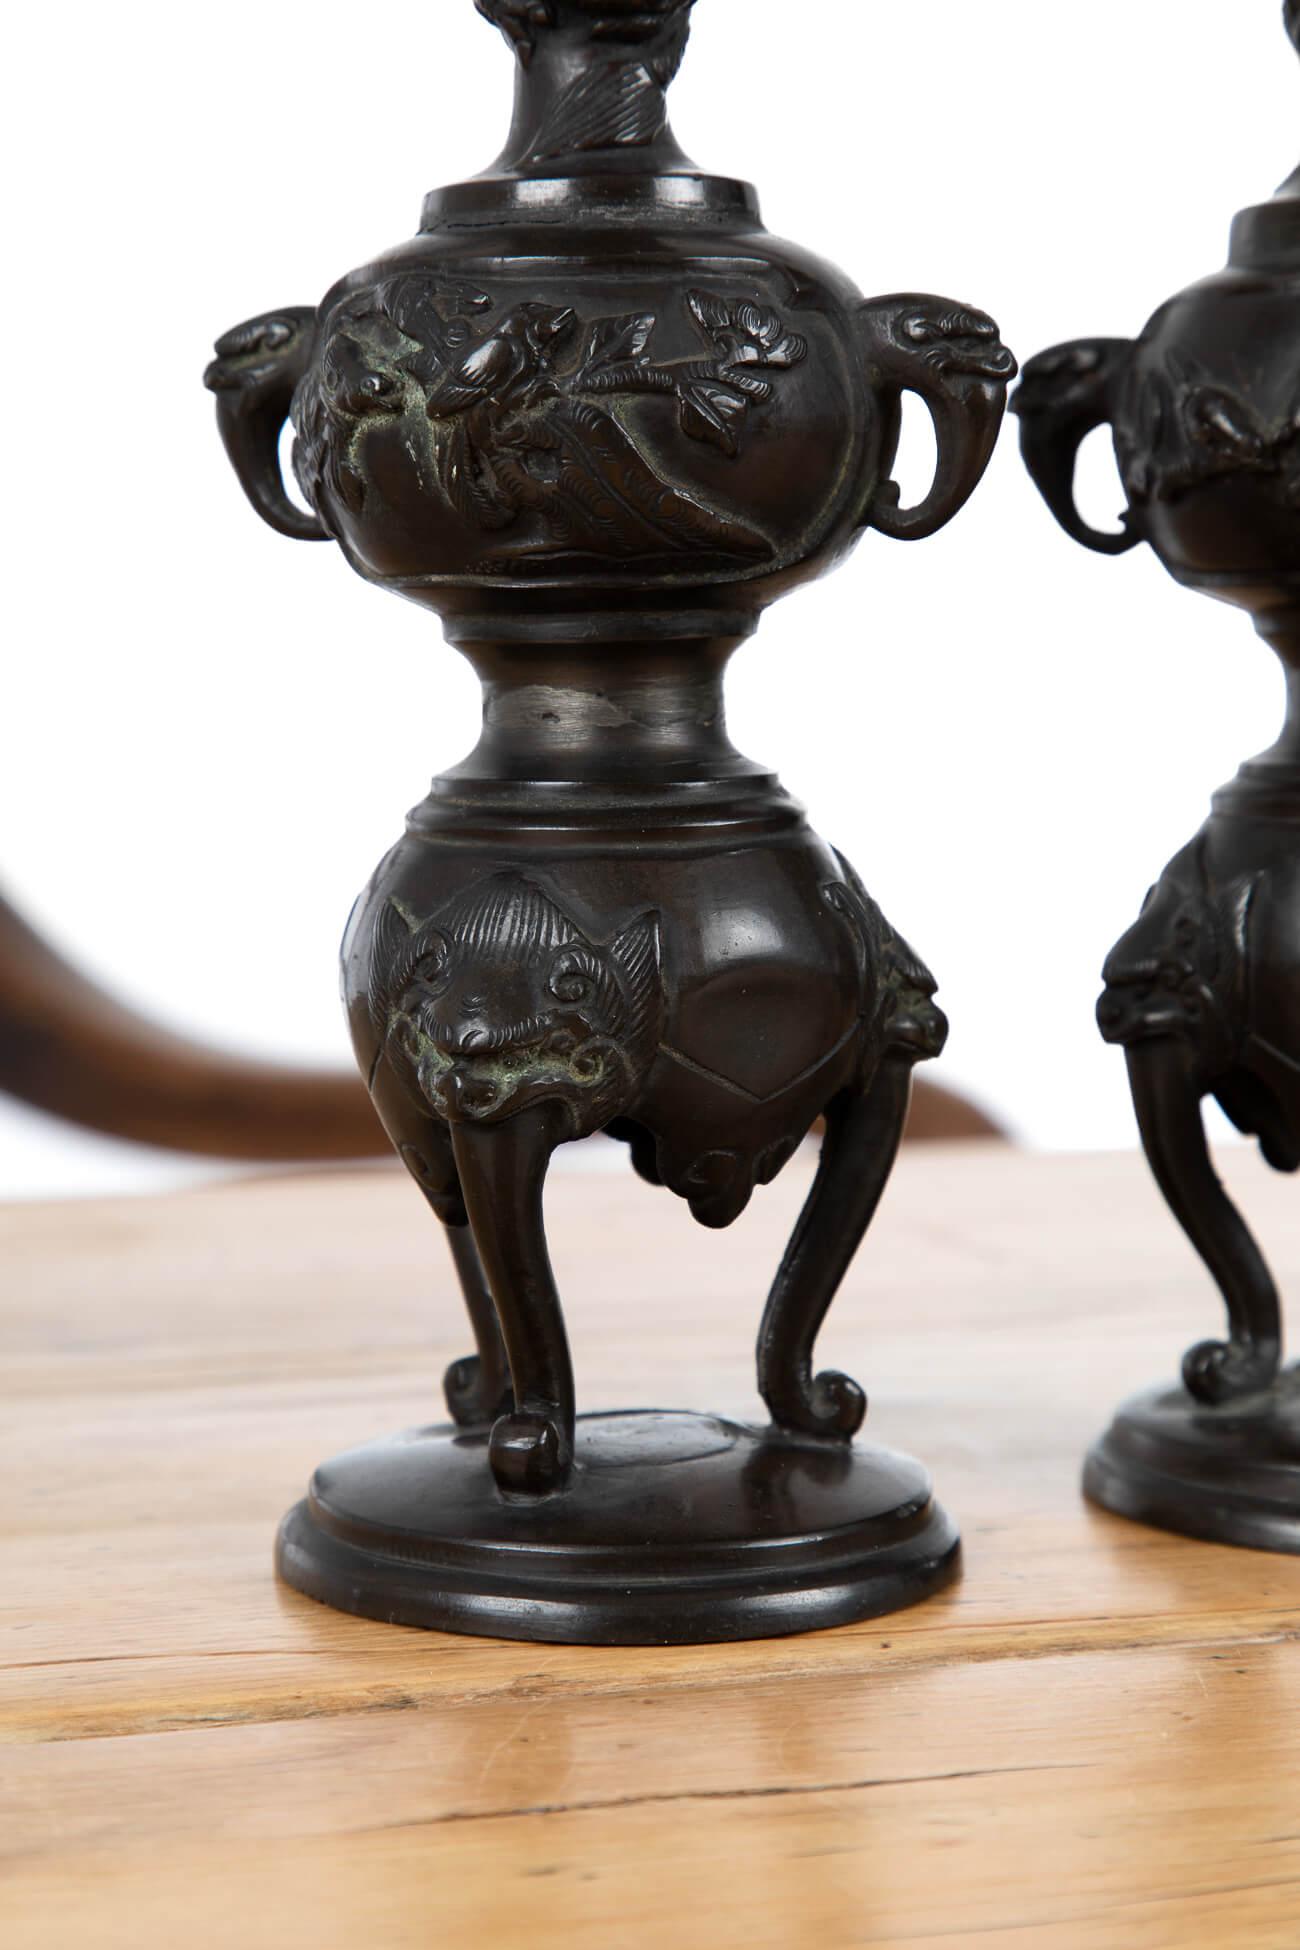 Pair of Meiji Period Japanese Bronze Candlesticks, circa 1870 In Good Condition For Sale In Faversham, GB